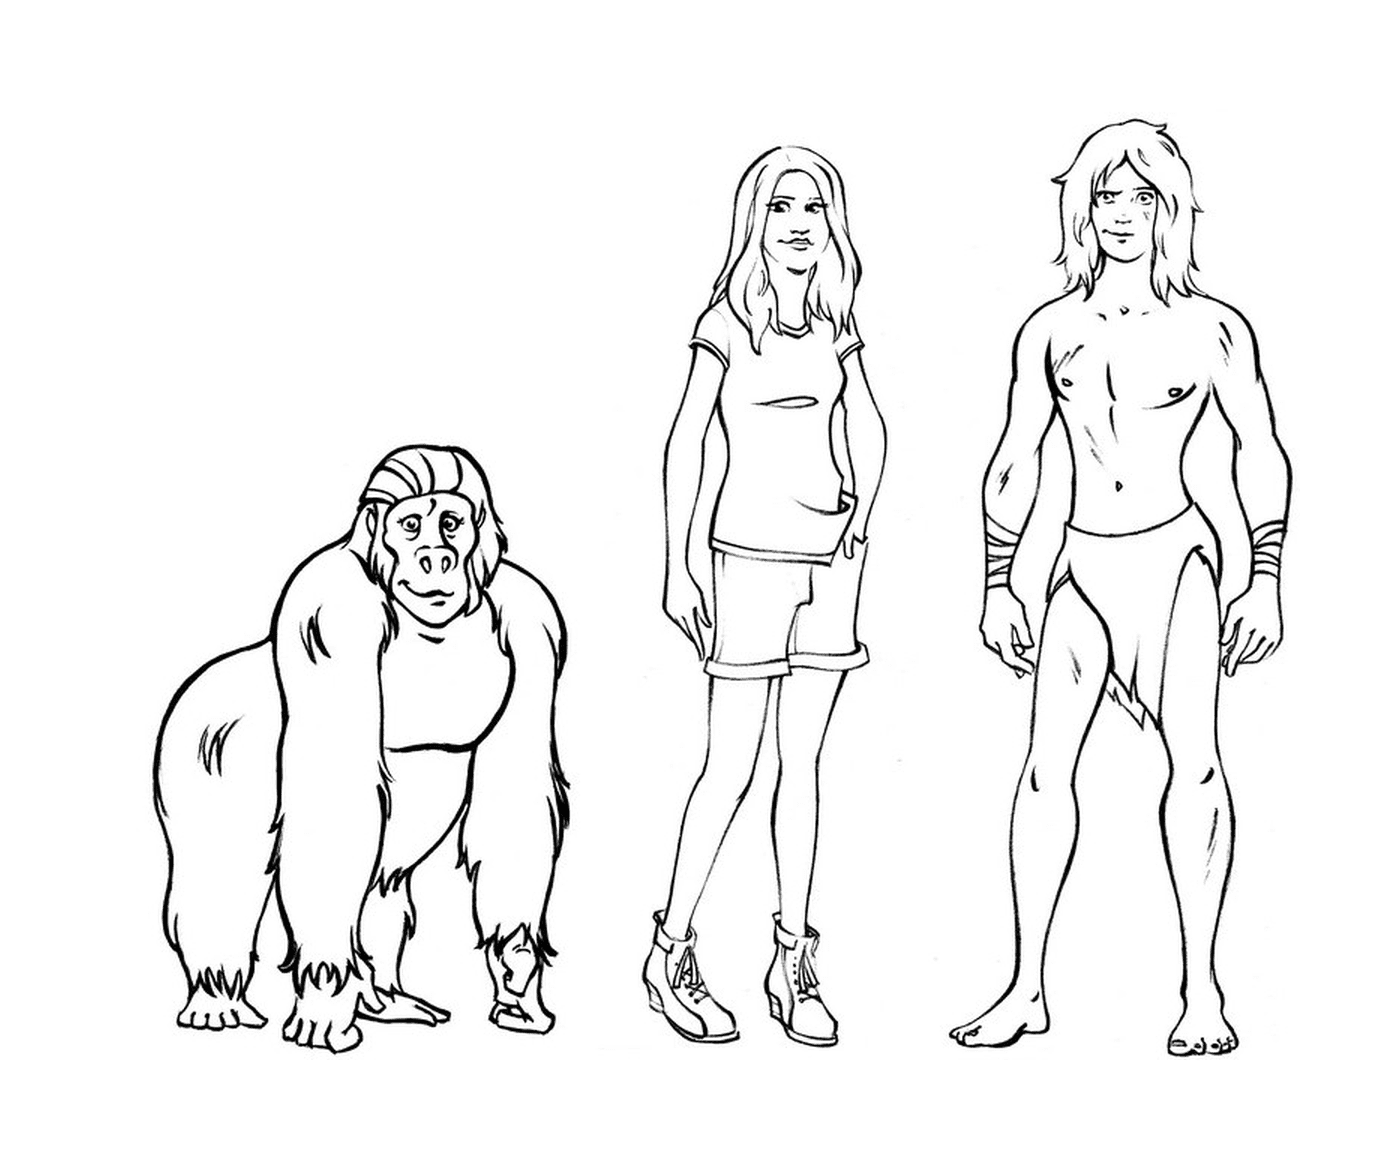  Man and woman standing next to a gorilla 